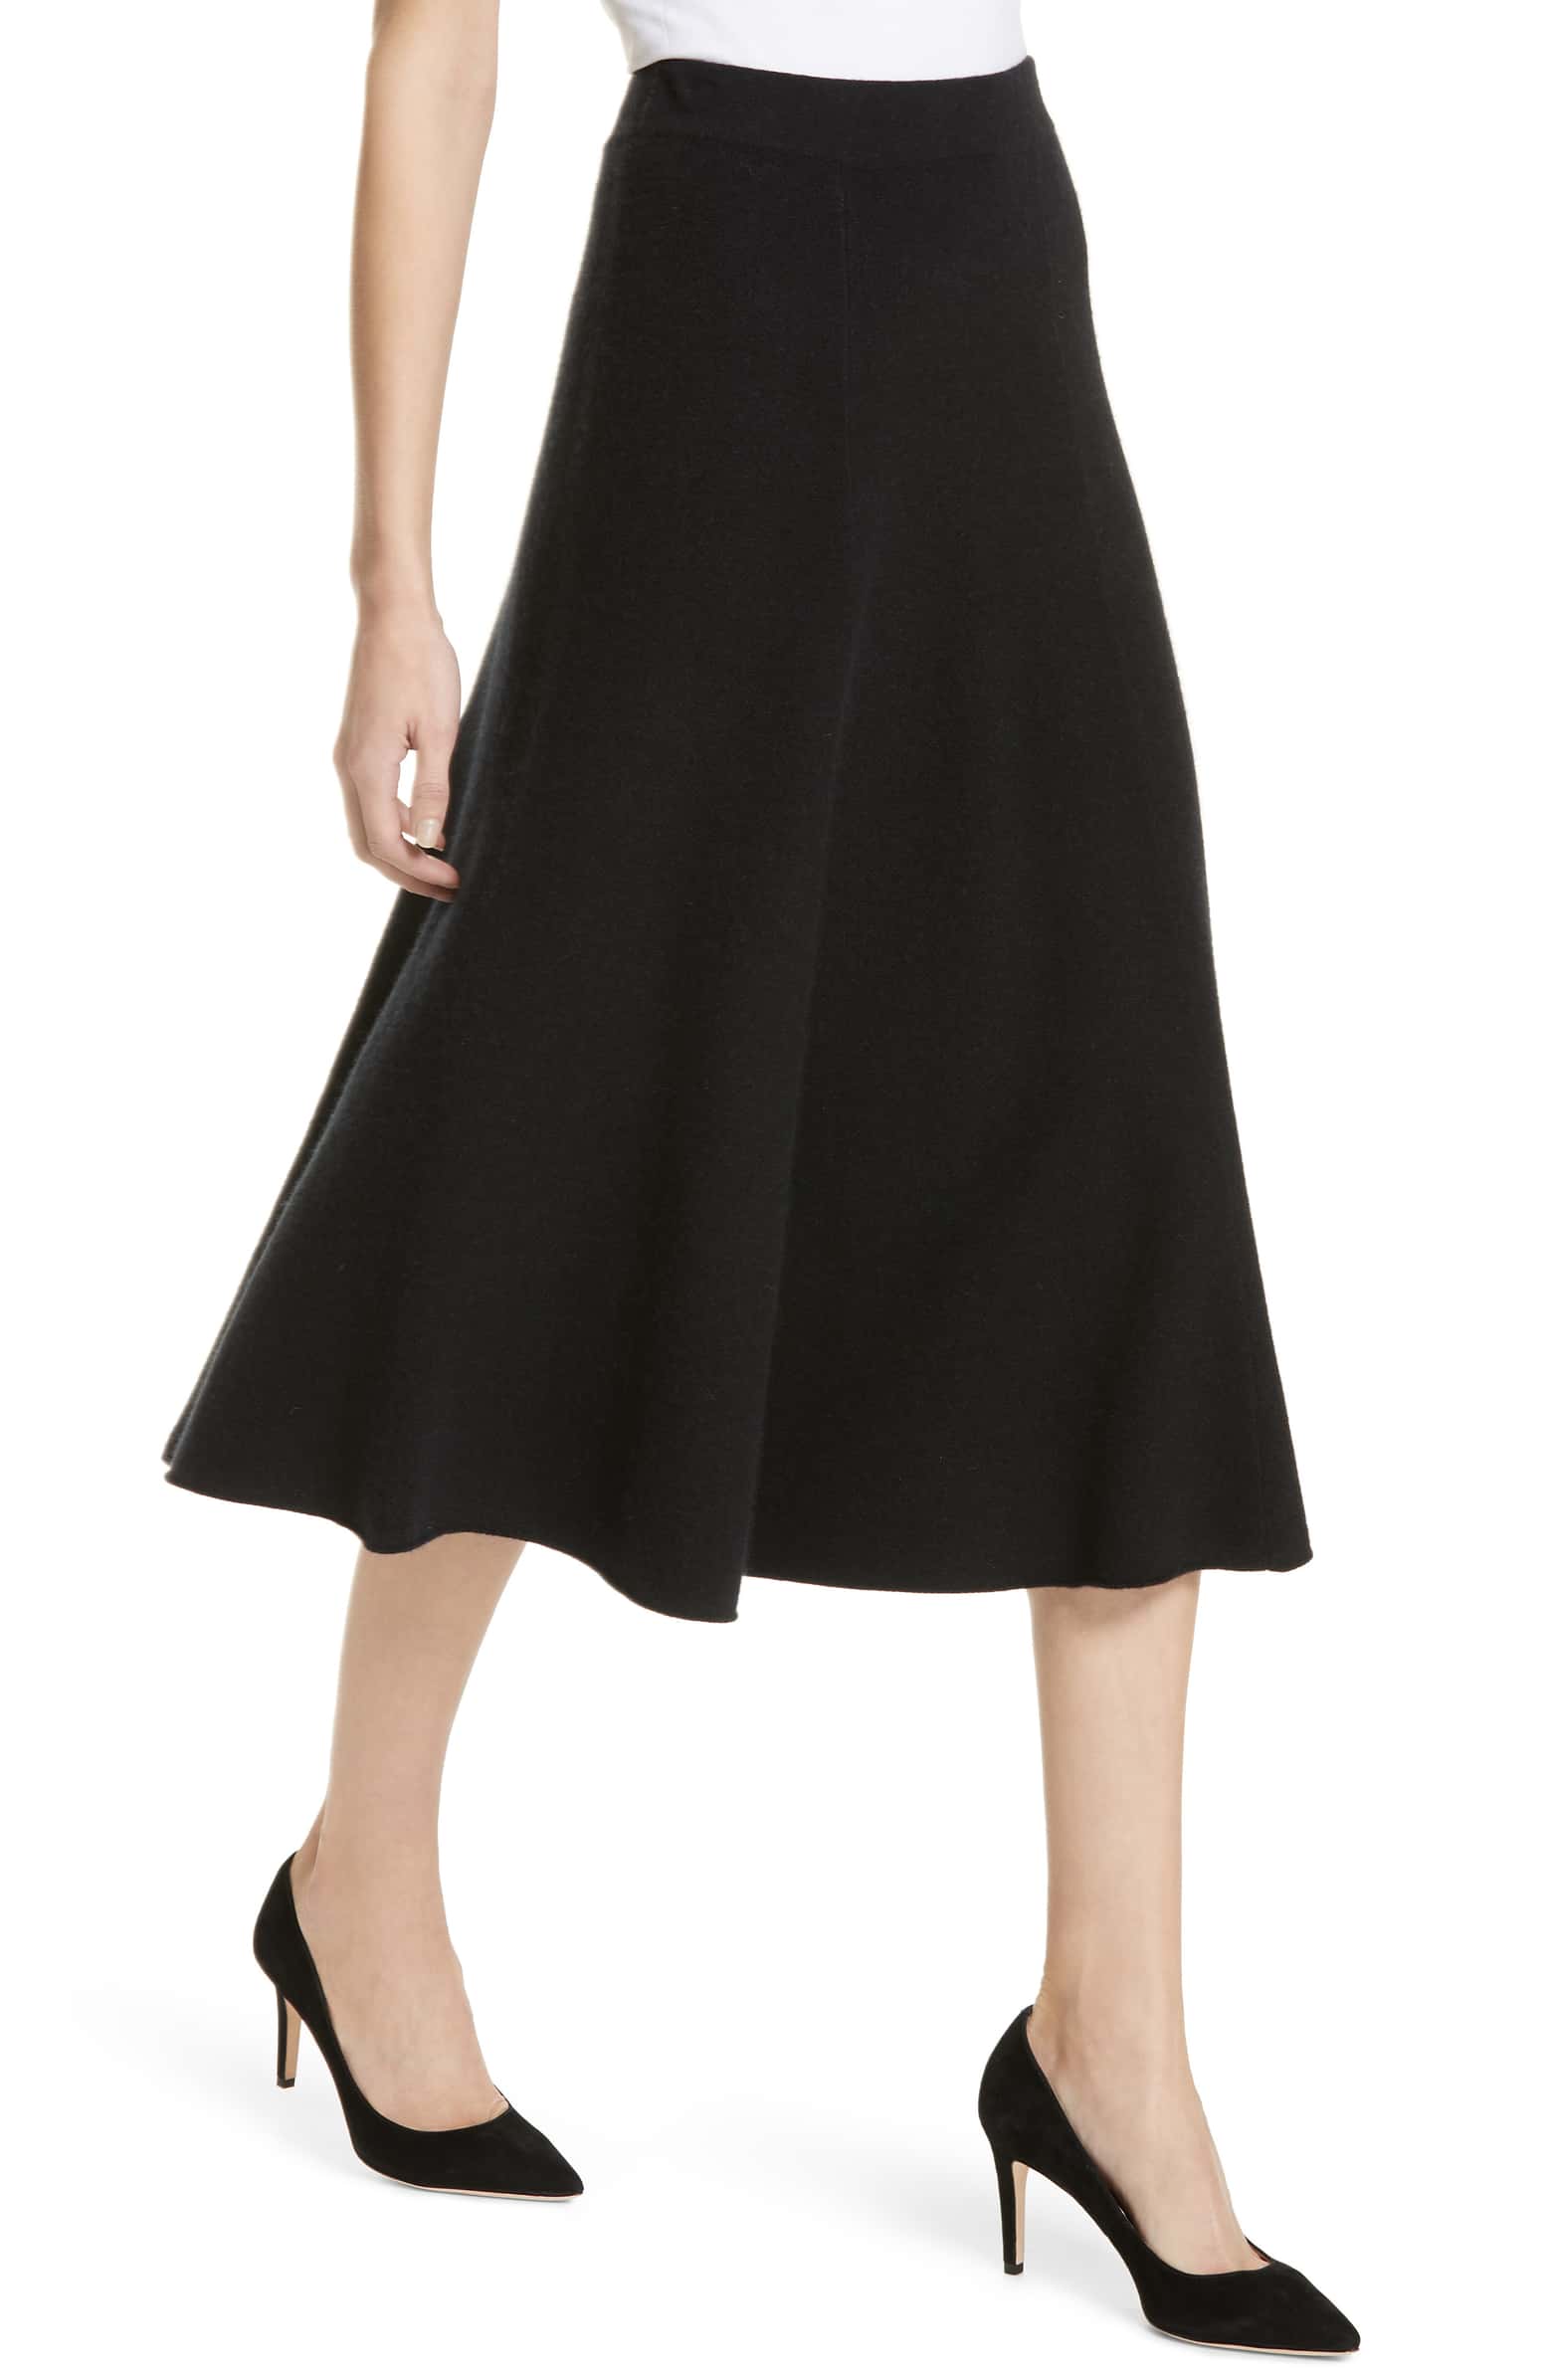 cashmere-midi-skirt-her-project-classic-essential-nordstrom-katie ...